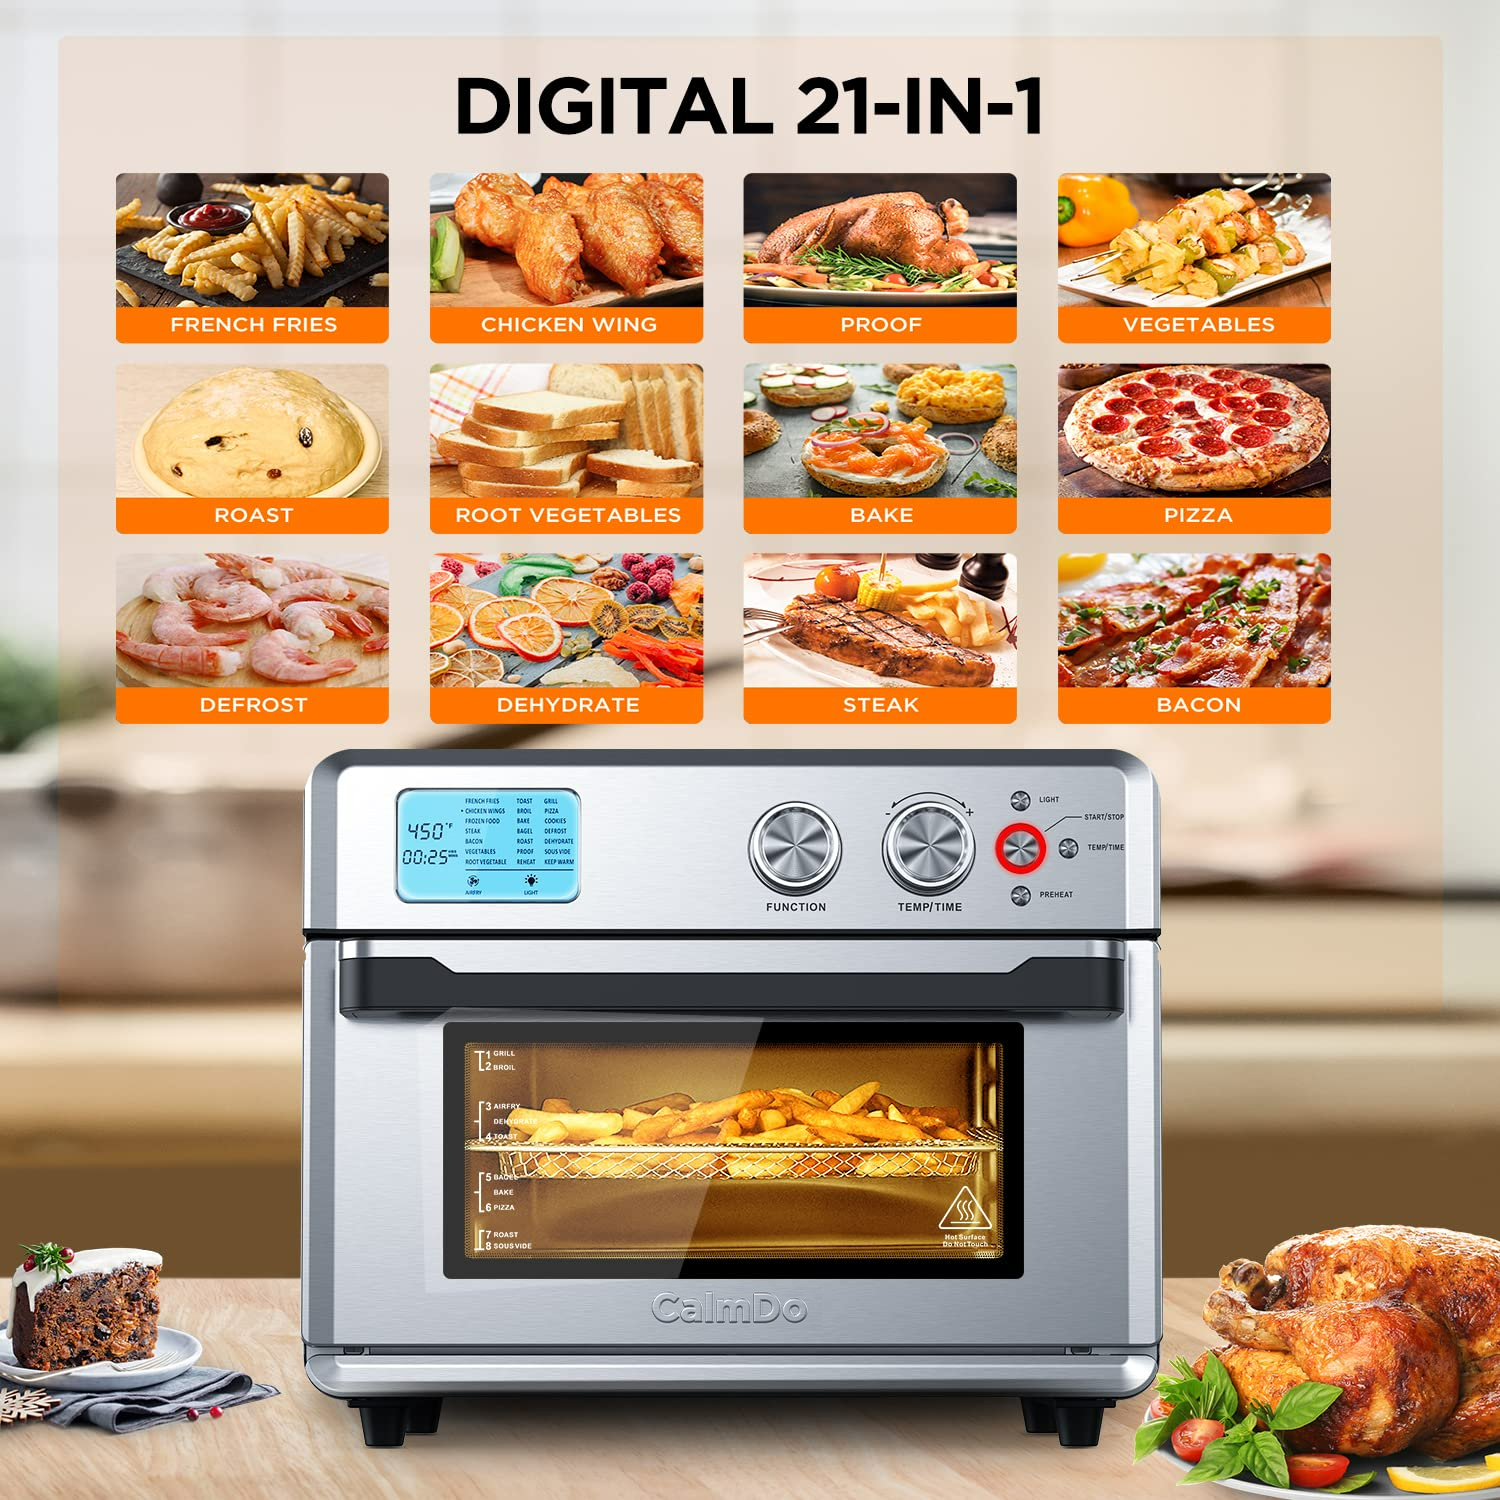 CalmDo AF25L Toaster Oven, CalmDo 26.3QT Large Air Fryer Convection Oven, Fry Oil-Free, 21 Preset Cooking Functions, Stainless Steel - image 8 of 10